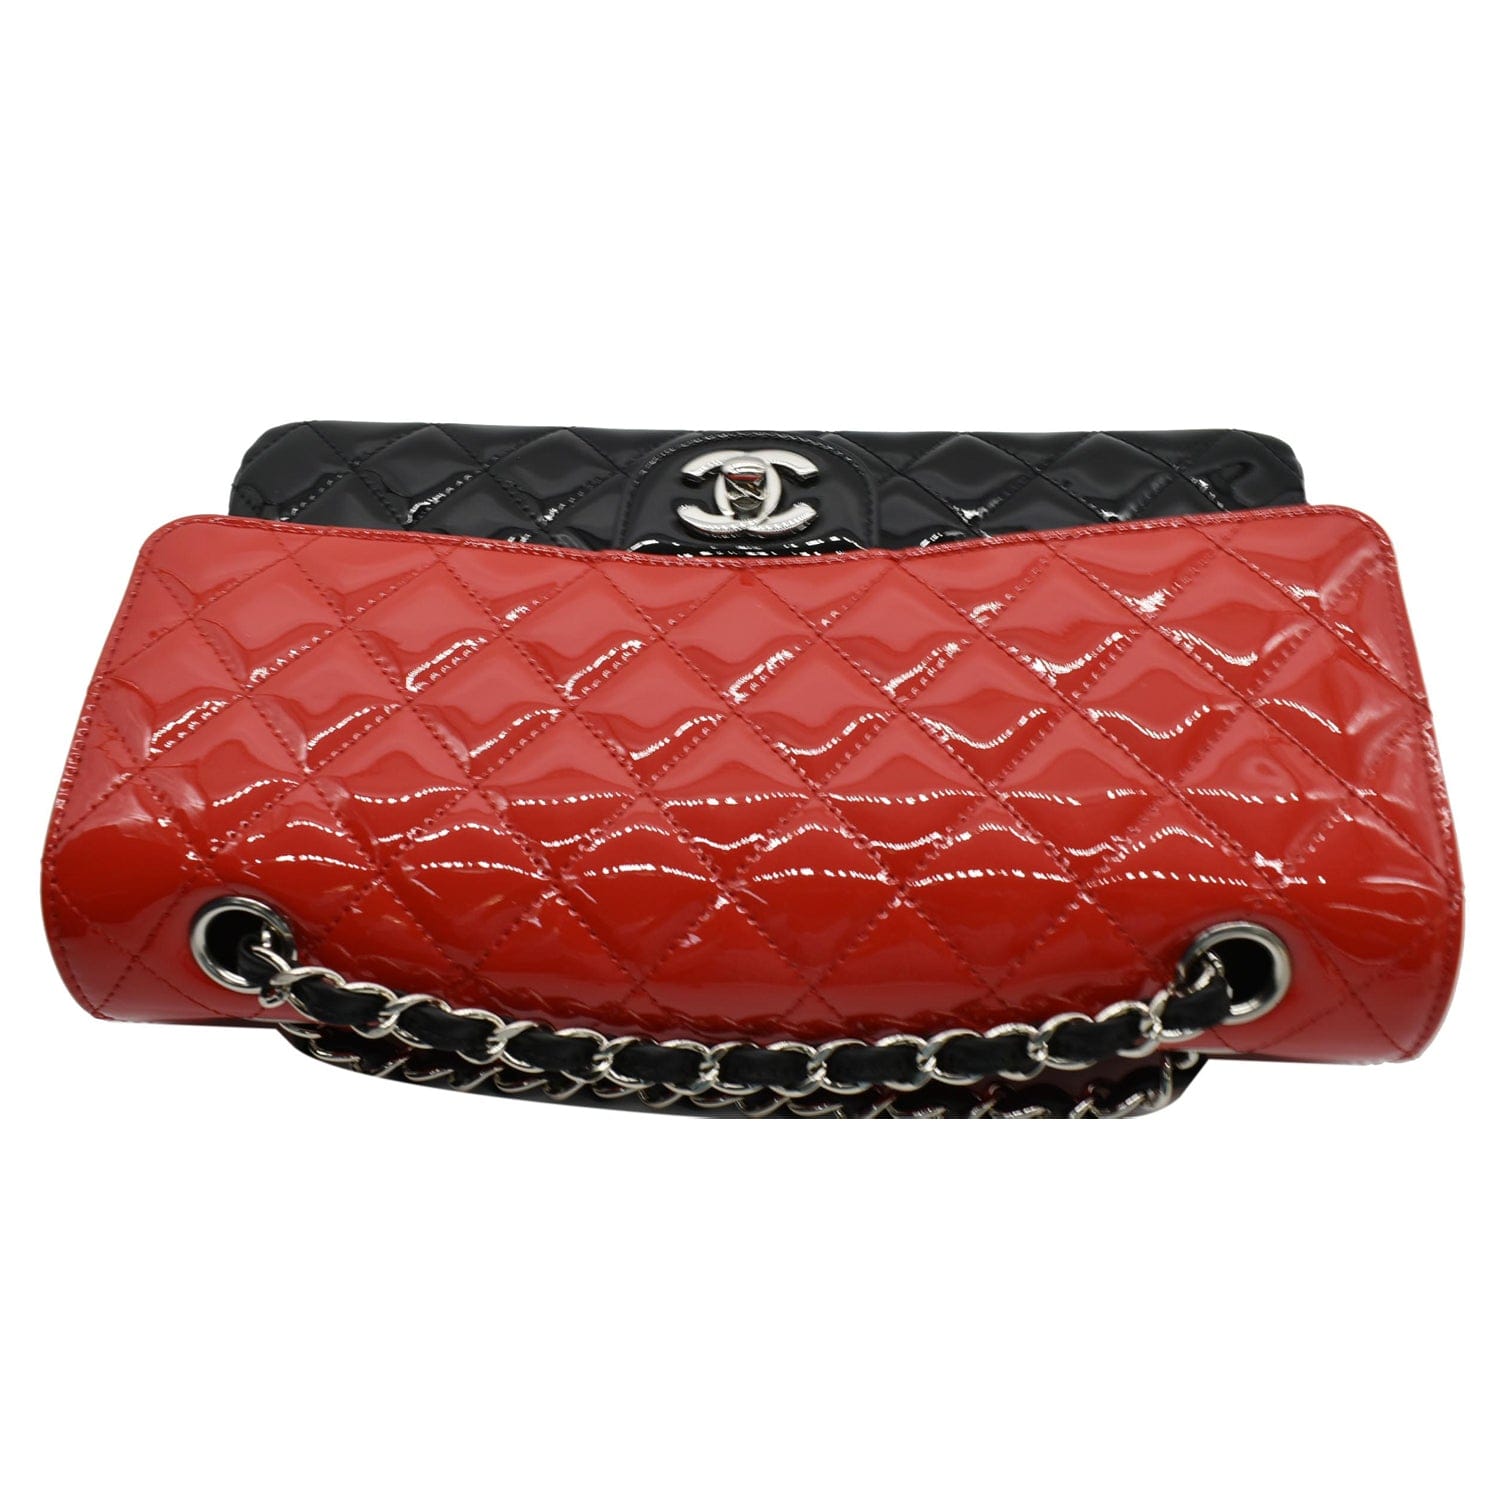 Chanel Medium Double Flap Quilted Patent Leather Shoulder Bag Black/Red